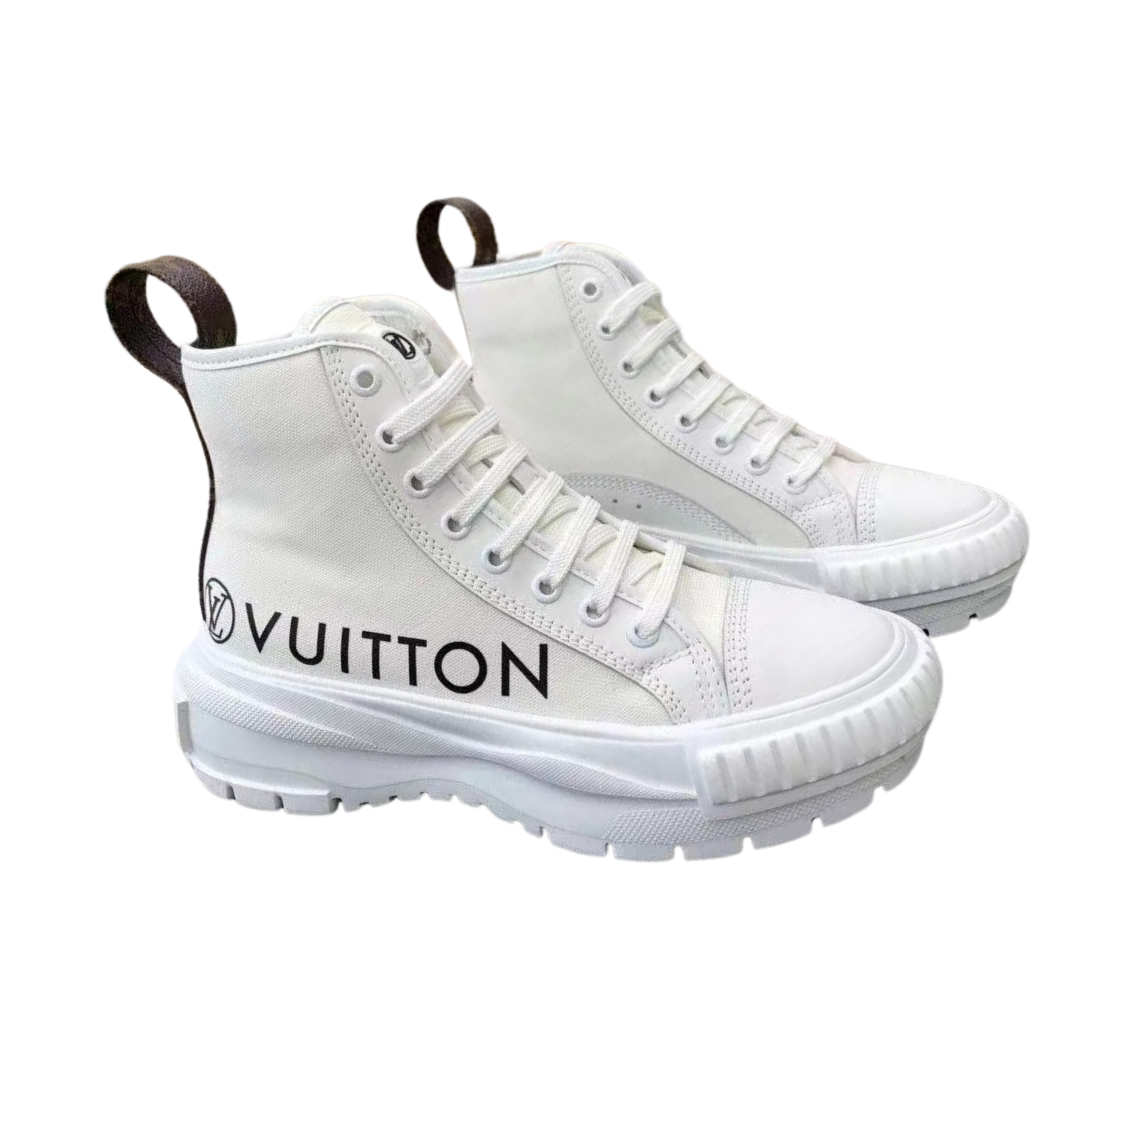 Squad Sneaker Boot White - Luxurious & High-Quality